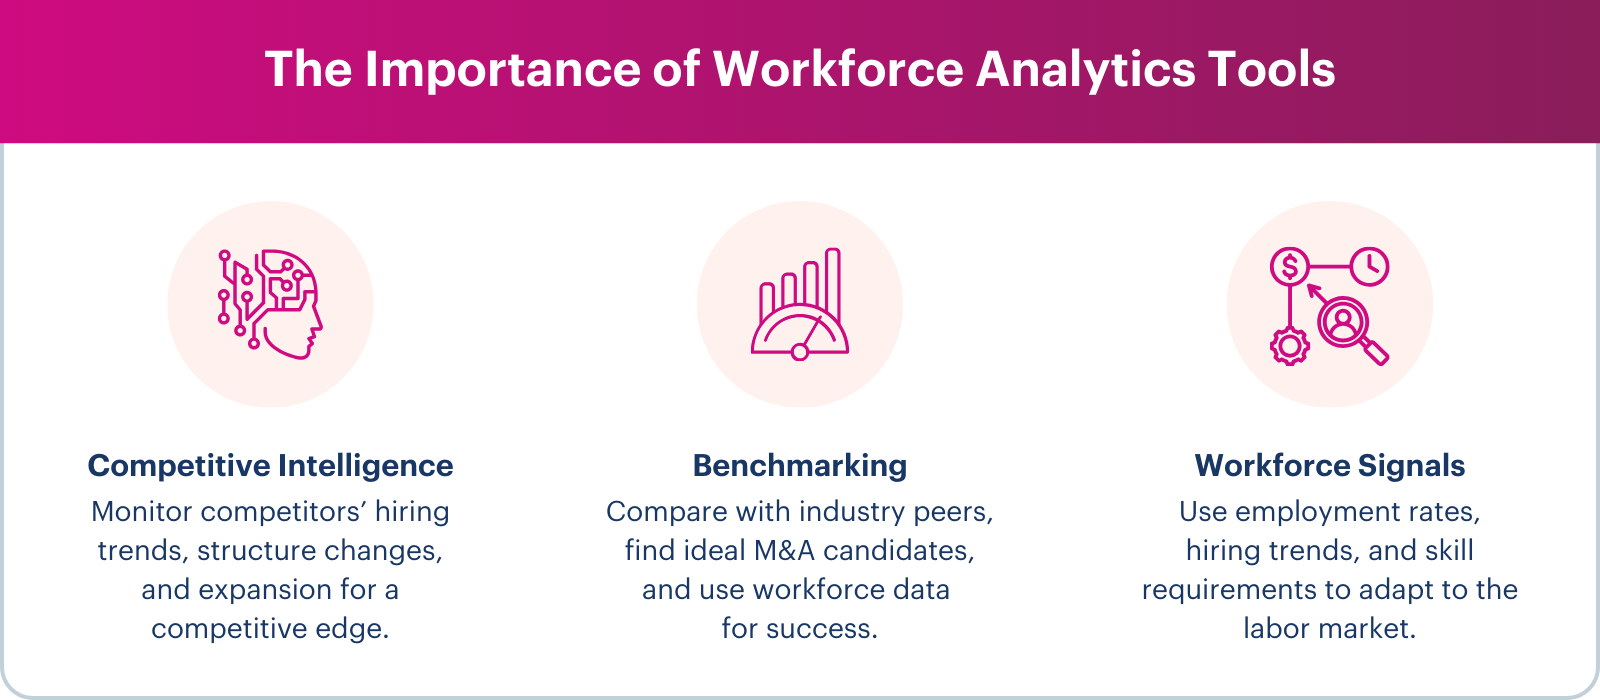 The Importance of Workforce Analytics Tools Competitive Intelligence Benchmarking Workforce Signals Monitor competitors’ hiring trends, structure changes, and expansion for a competitive edge. Compare with industry peers, find ideal M&A candidates, and use workforce data for success. Use employment rates, hiring trends, and skill requirements to adapt to the labor market.